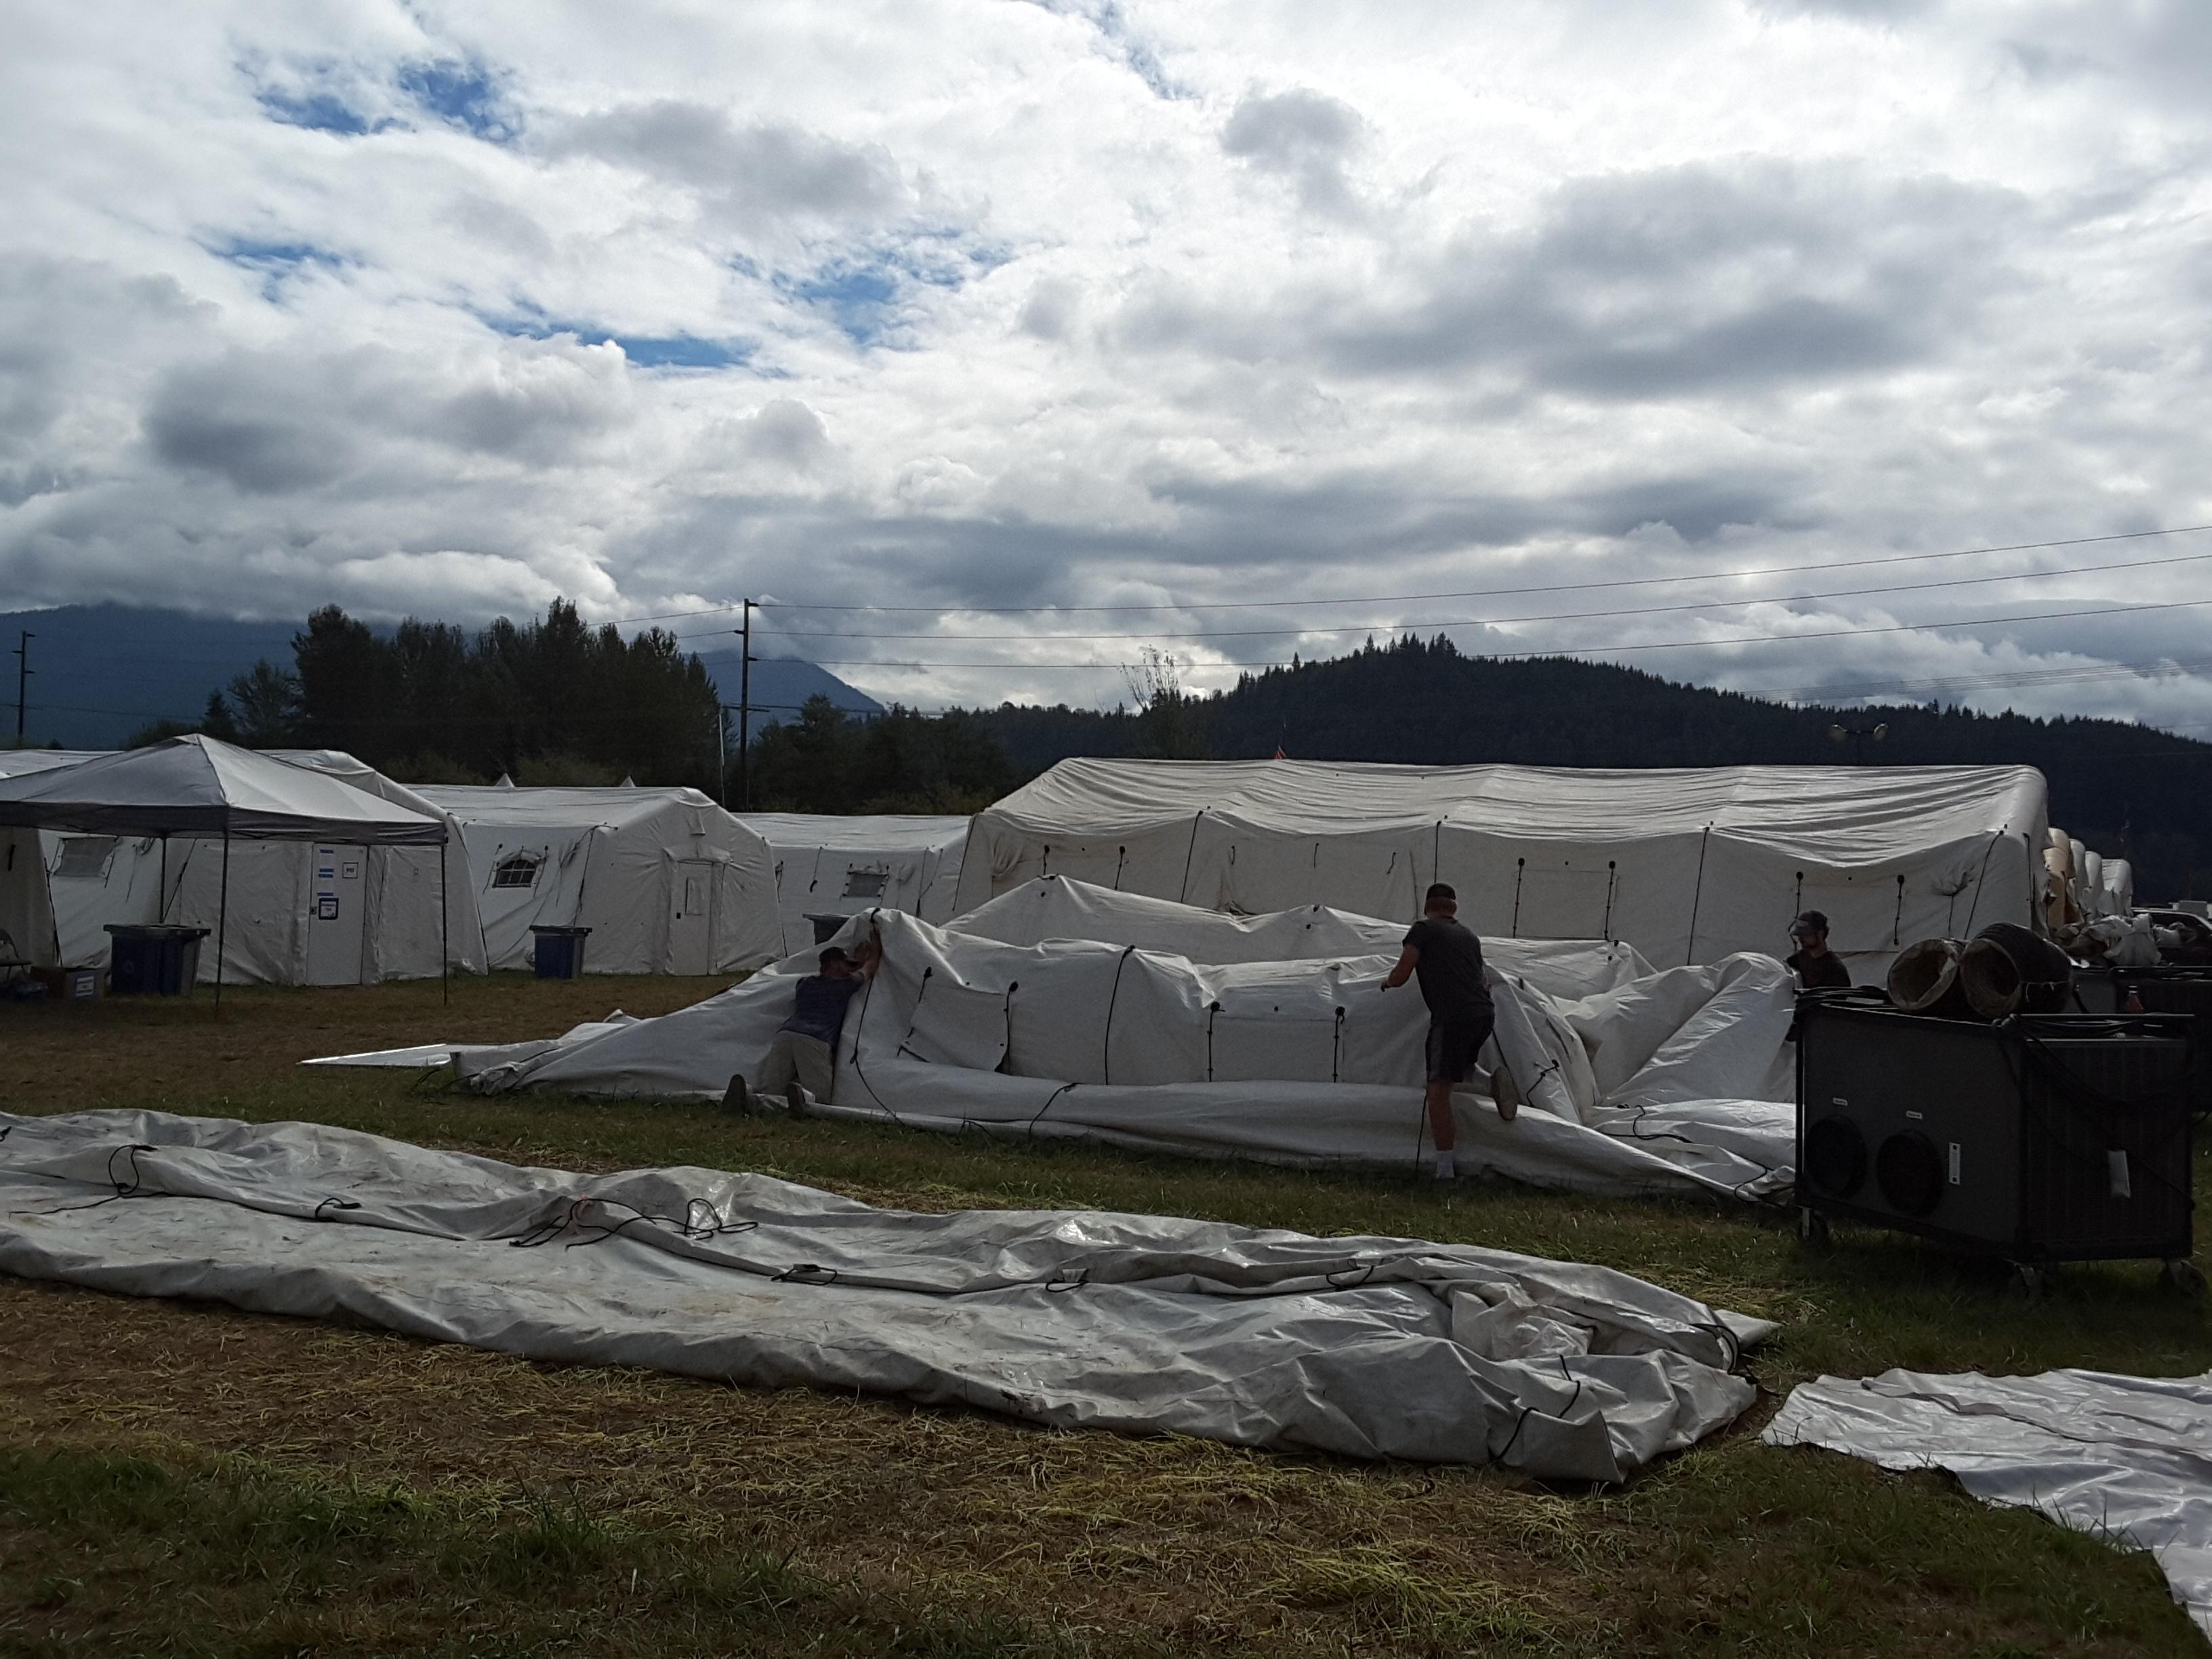 Several men are working to collapse a large yurt so it can be folded and hauled away. A flattened yurt is in the foreground. Several standing yurts are in the background.